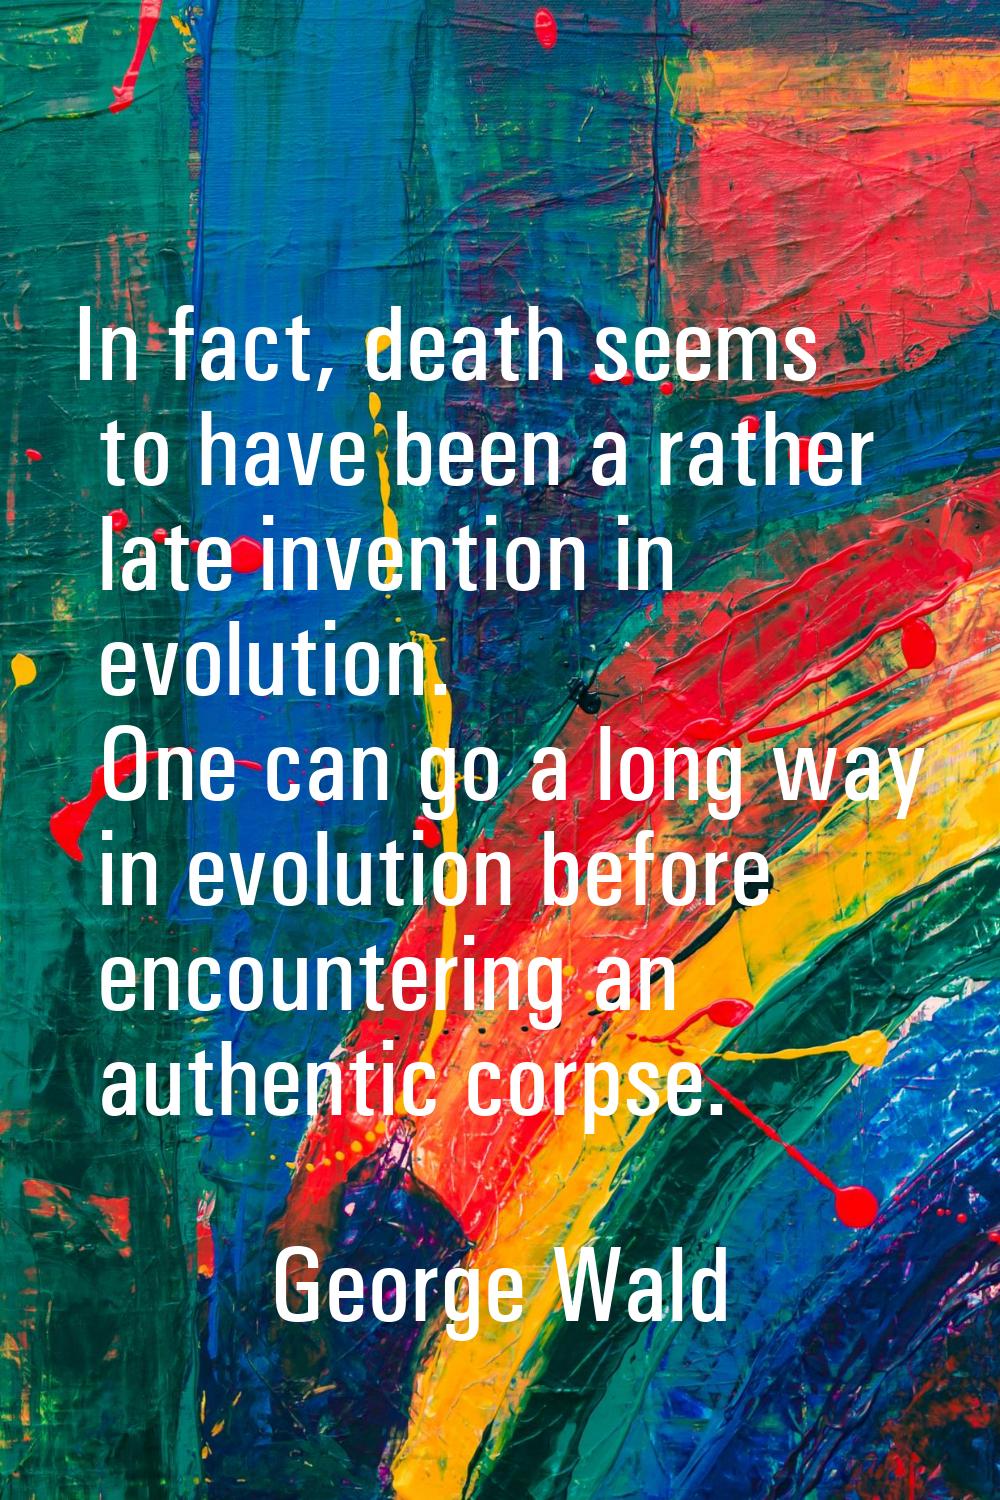 In fact, death seems to have been a rather late invention in evolution. One can go a long way in ev